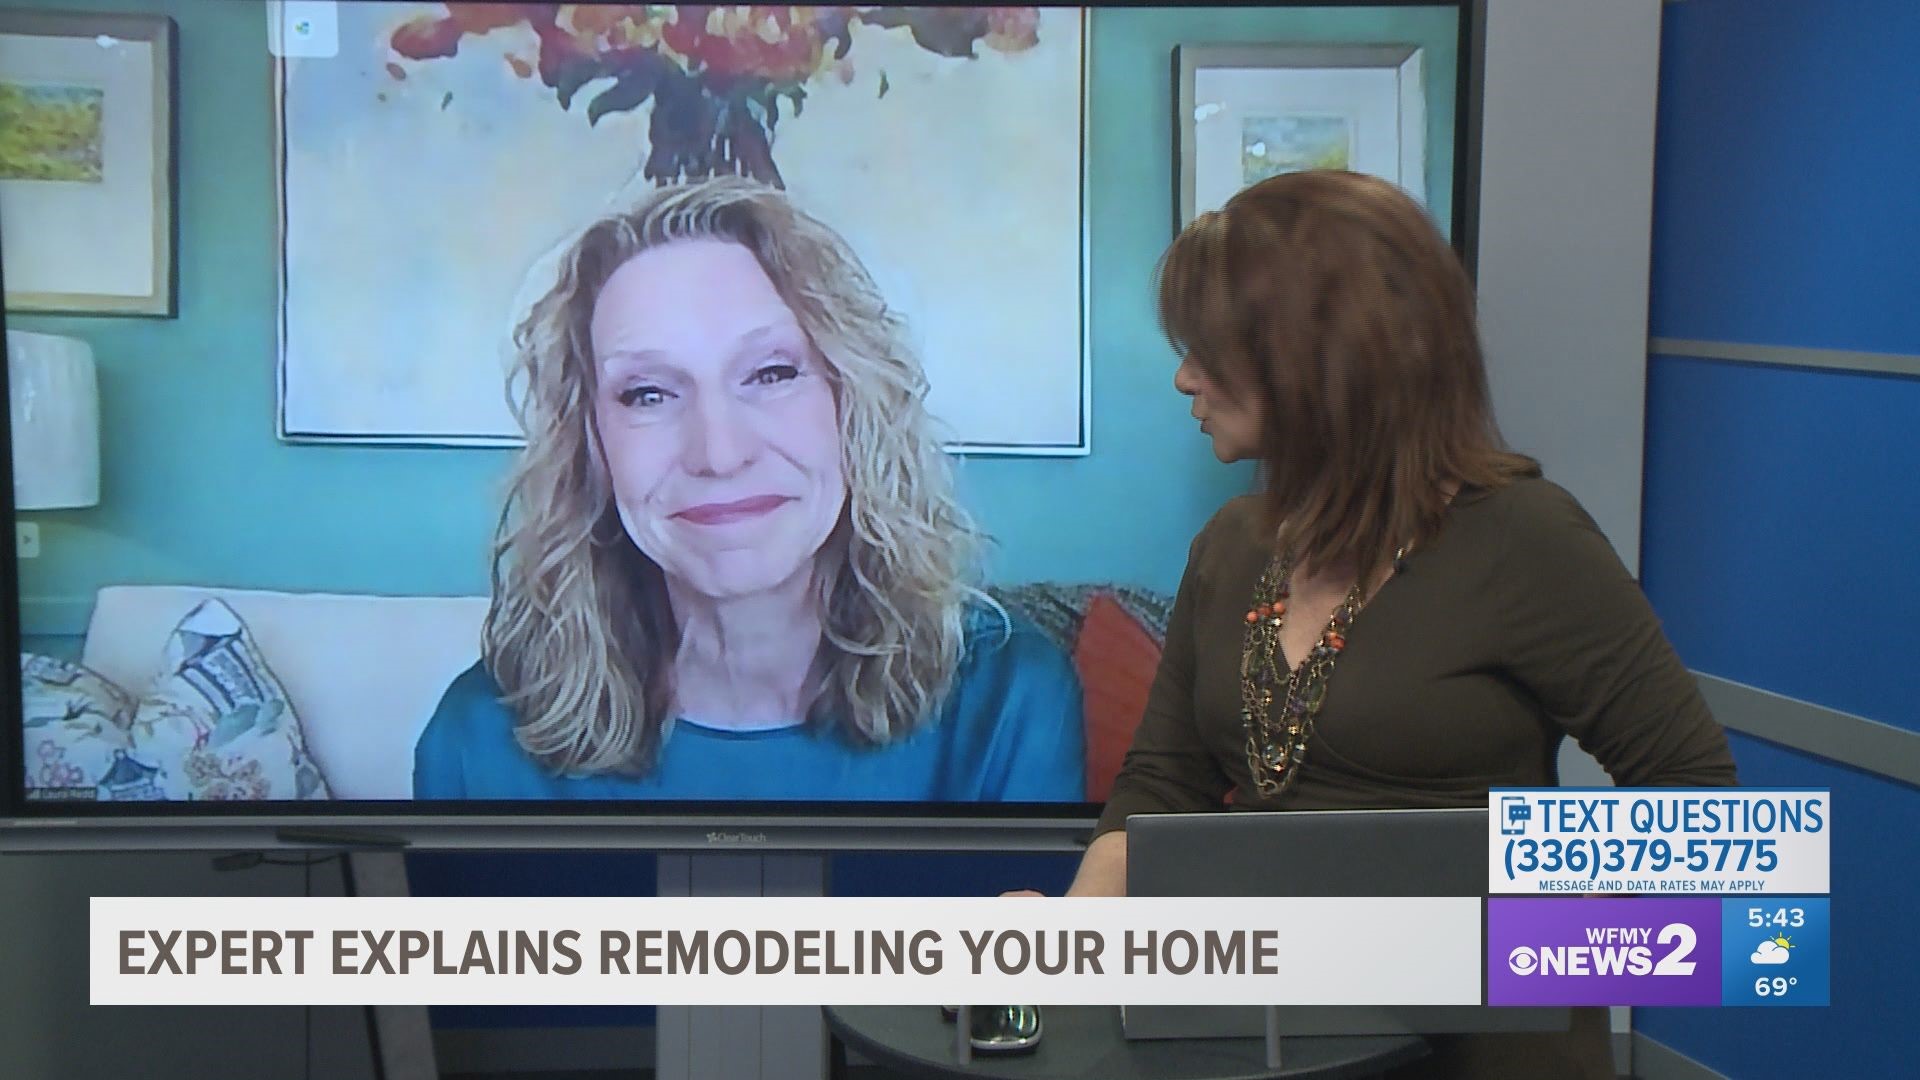 Laura Redd said people often make two common mistakes during the remodeling process.